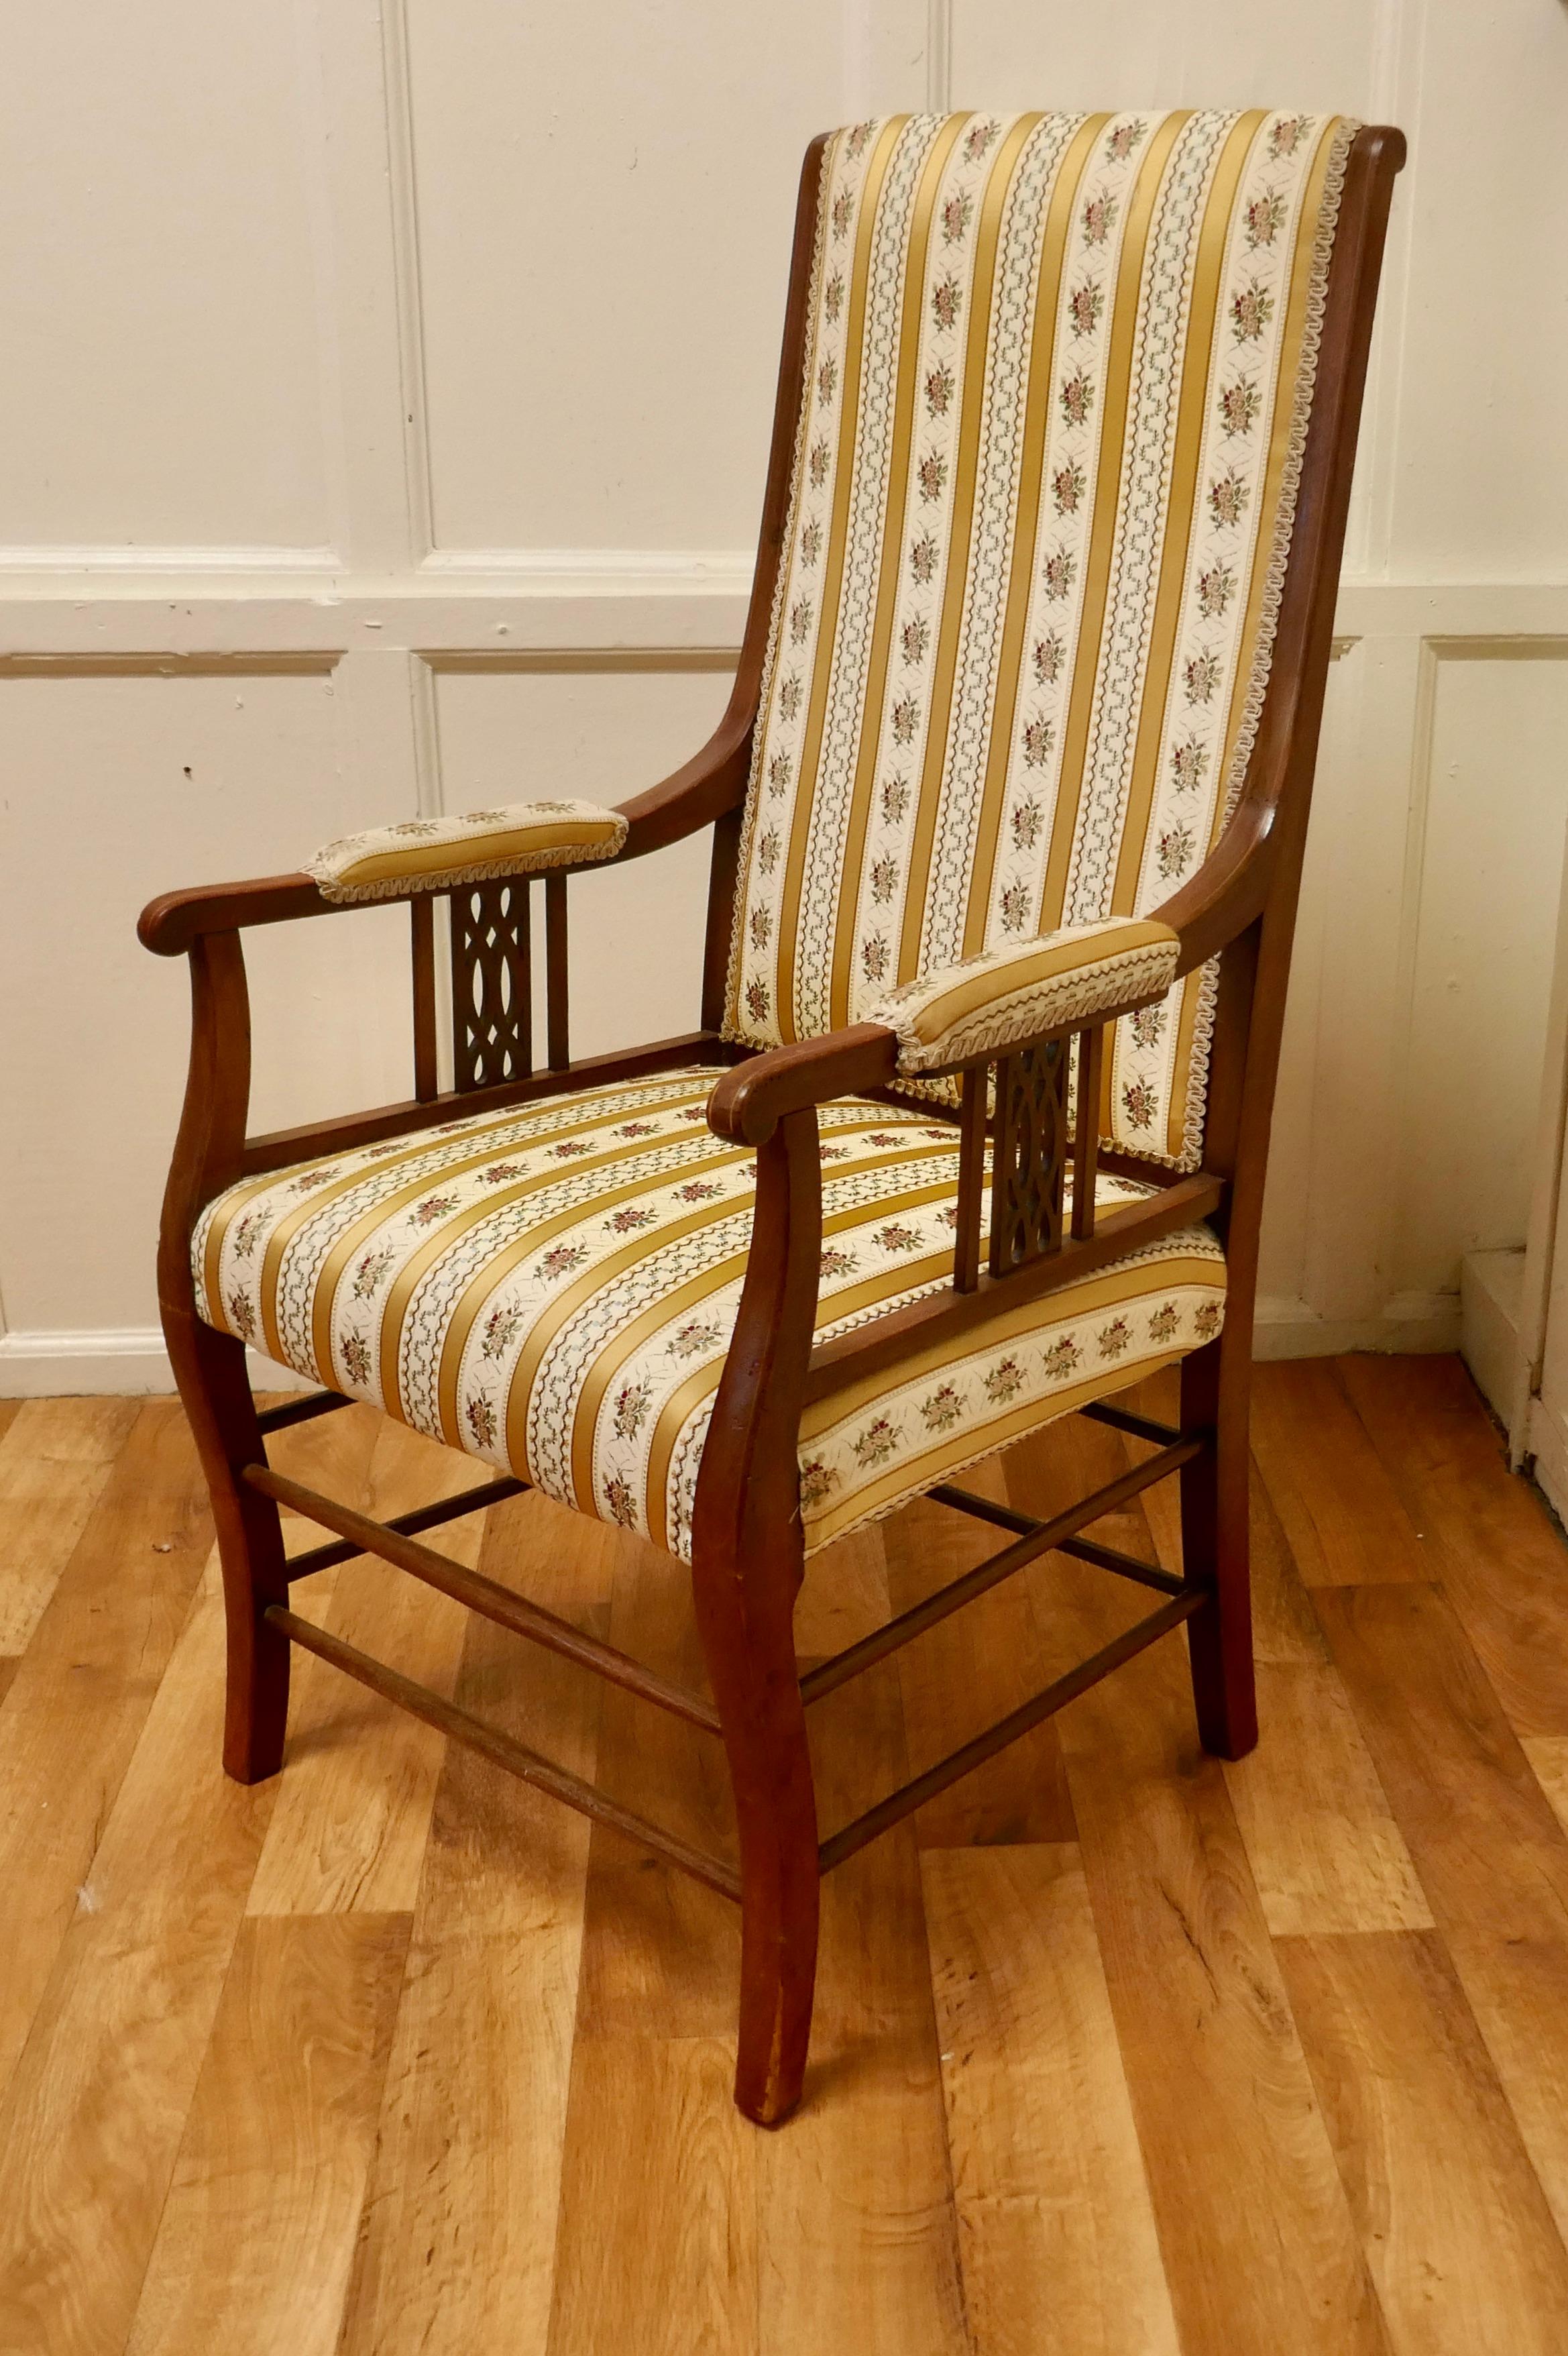 Edwardian Fine Quality Regency Style High Back Upholstered Arm Chair For Sale